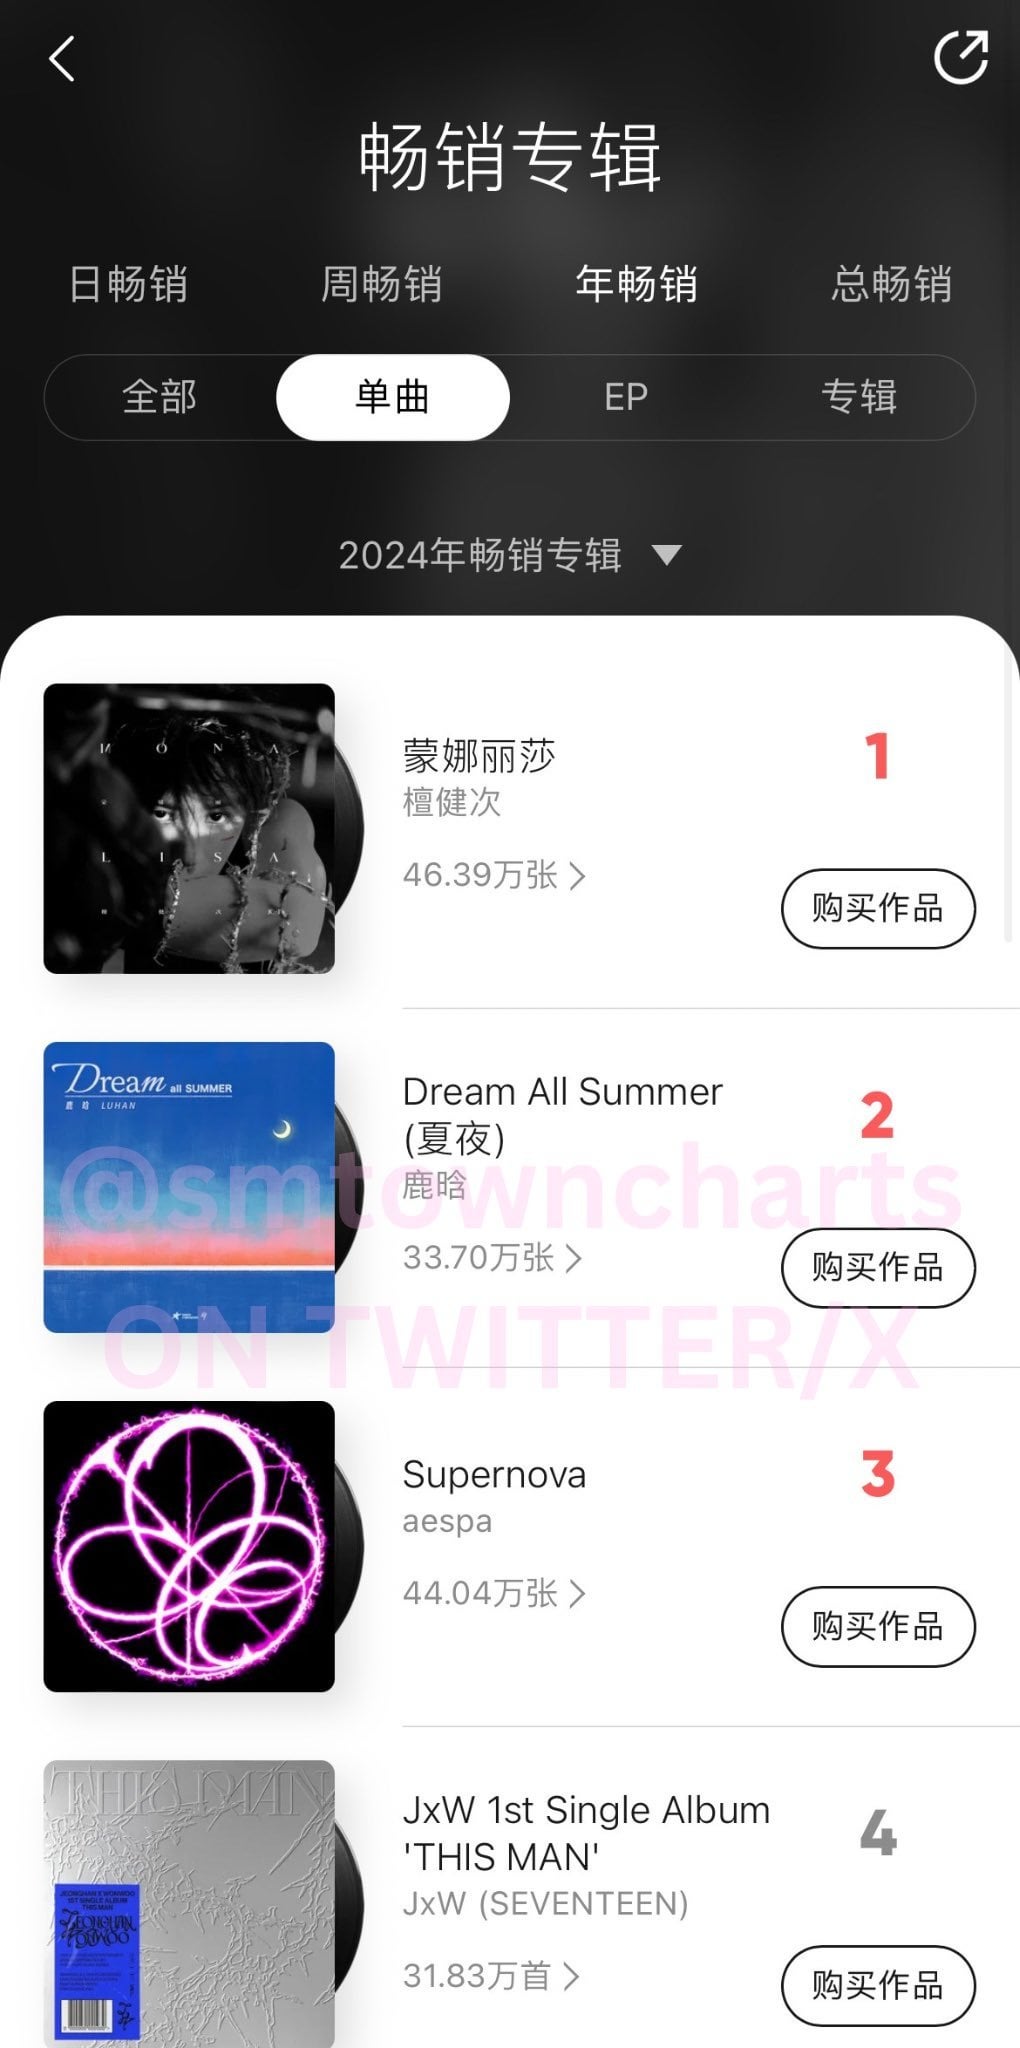 240628 ‘Supernova’ is now the best selling digital single in 2024 by an international act on QQ Music